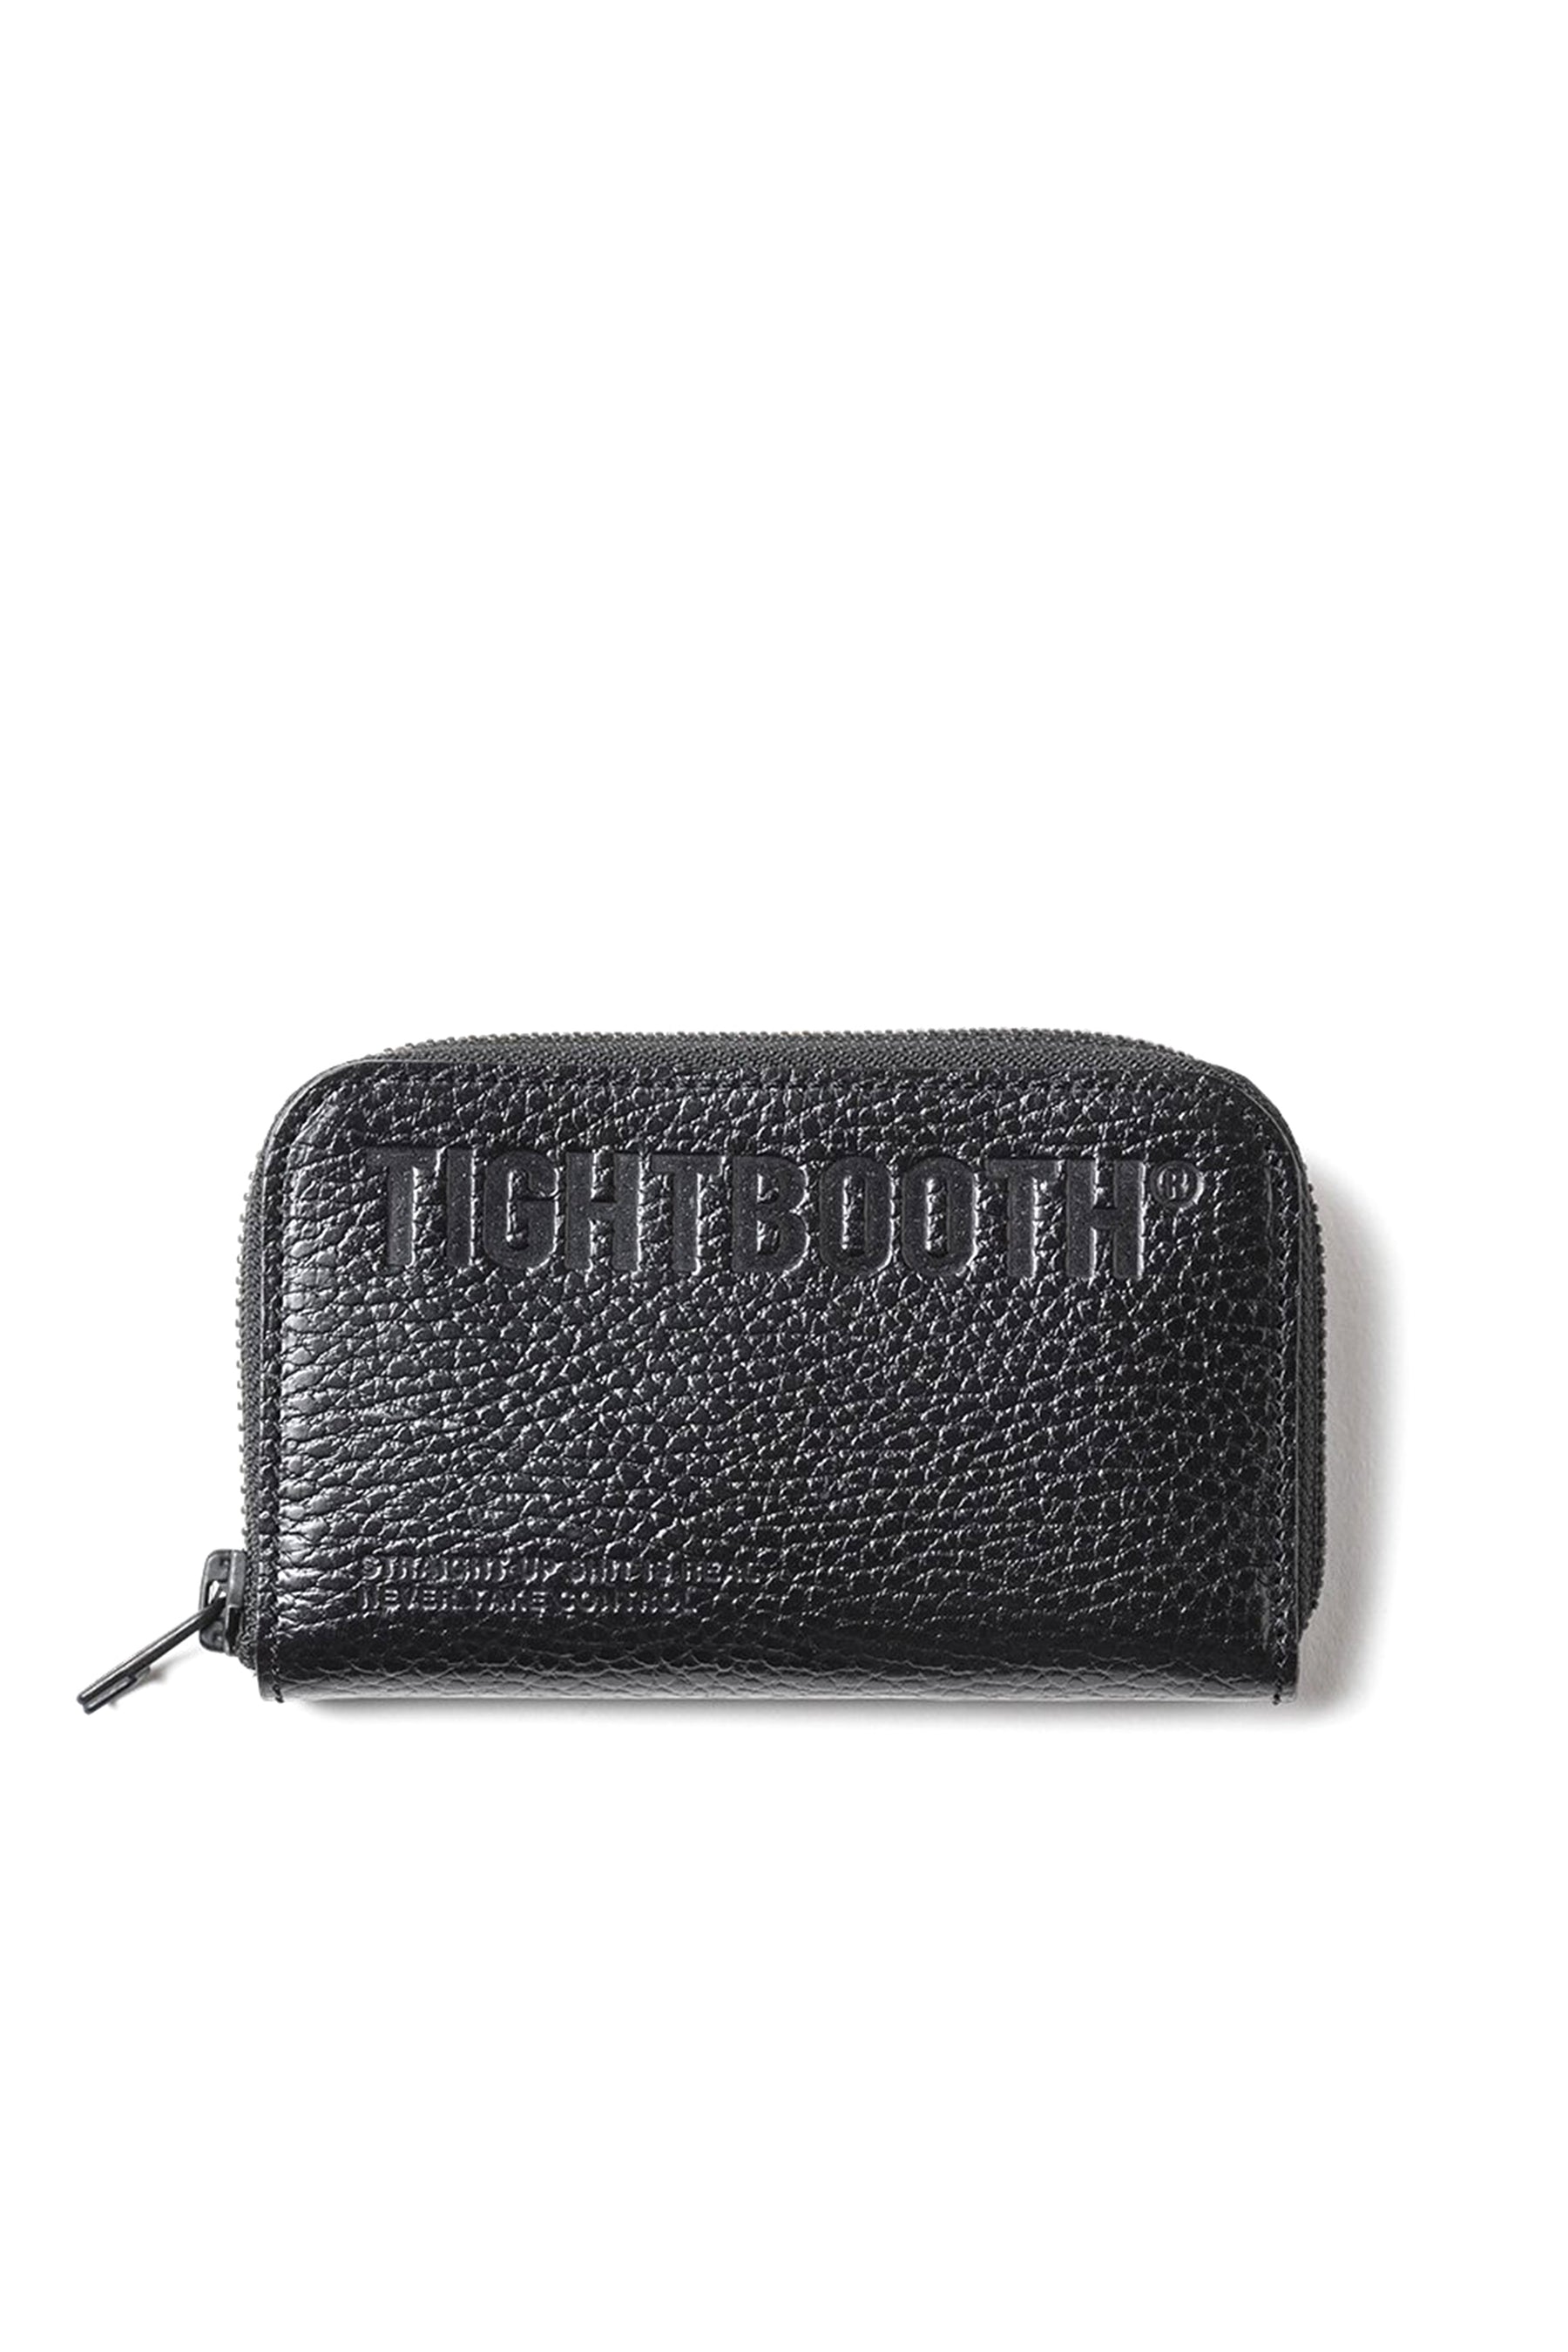 TIGHTBOOTH タイトブース FW23 LEATHER ZIP AROUND WALLET / BLK -NUBIAN